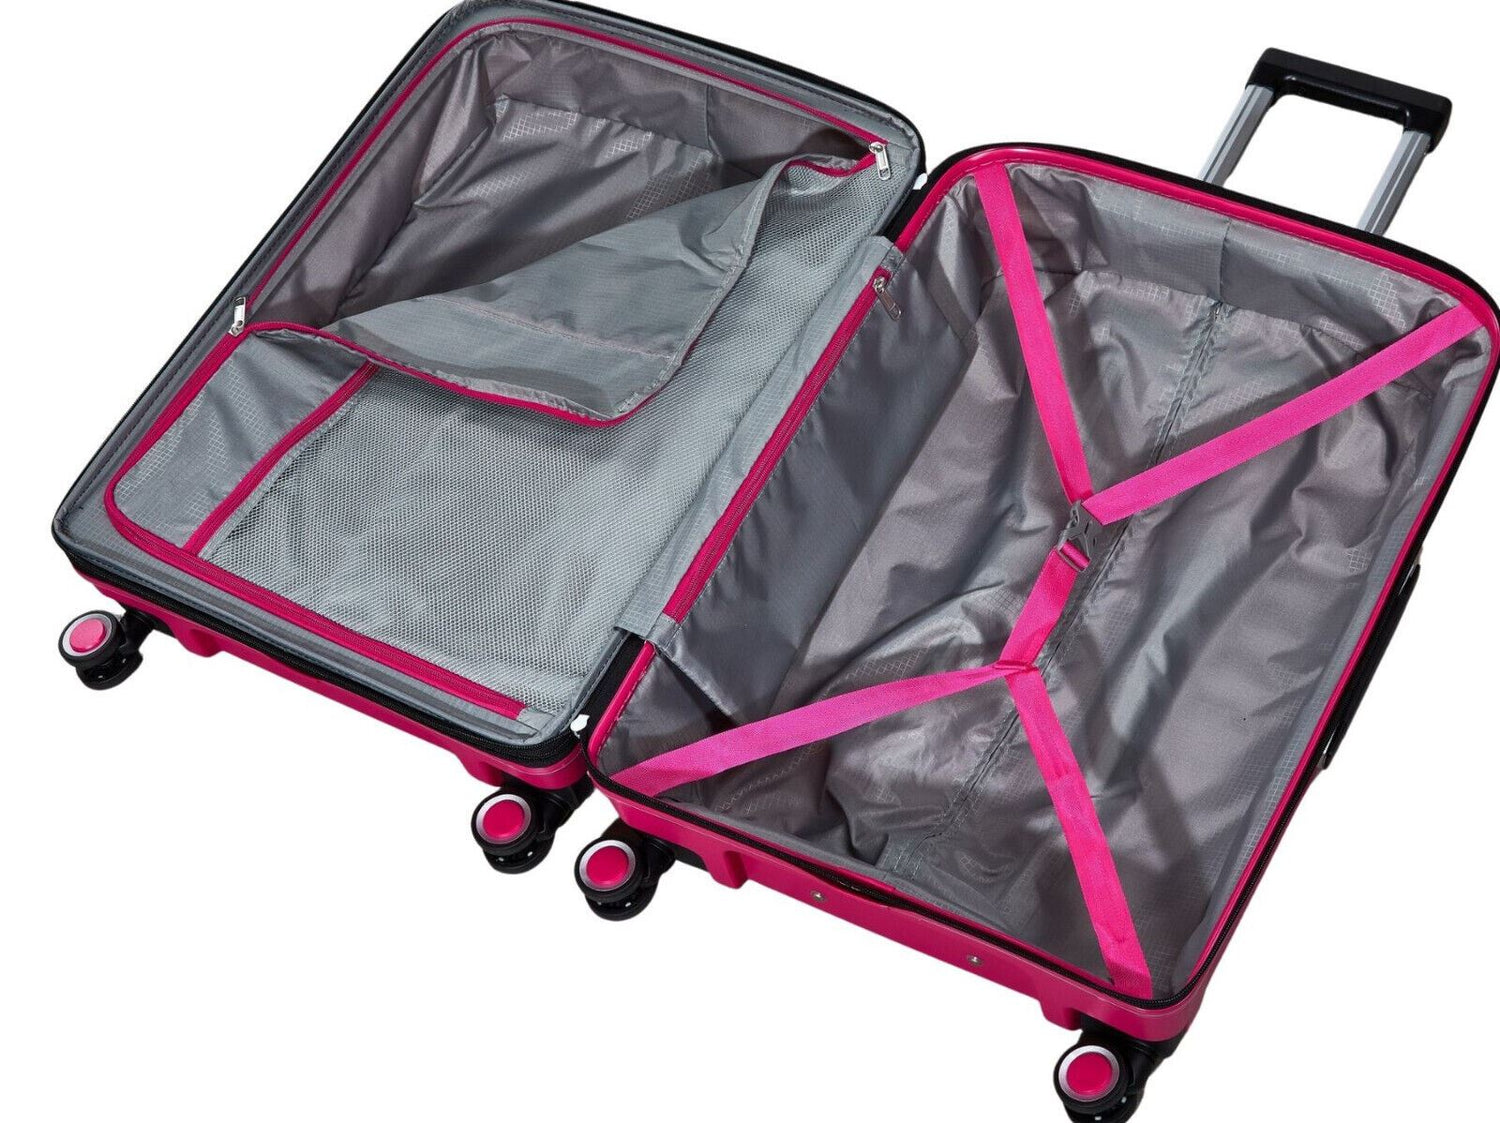 Hard Shell Classic Pink Suitcase Set 8 Wheel Cabin Luggage Trolley Travel Bag